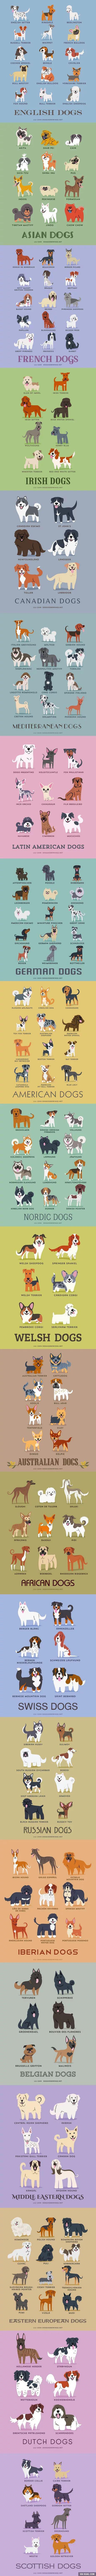 4. Dog breed guide